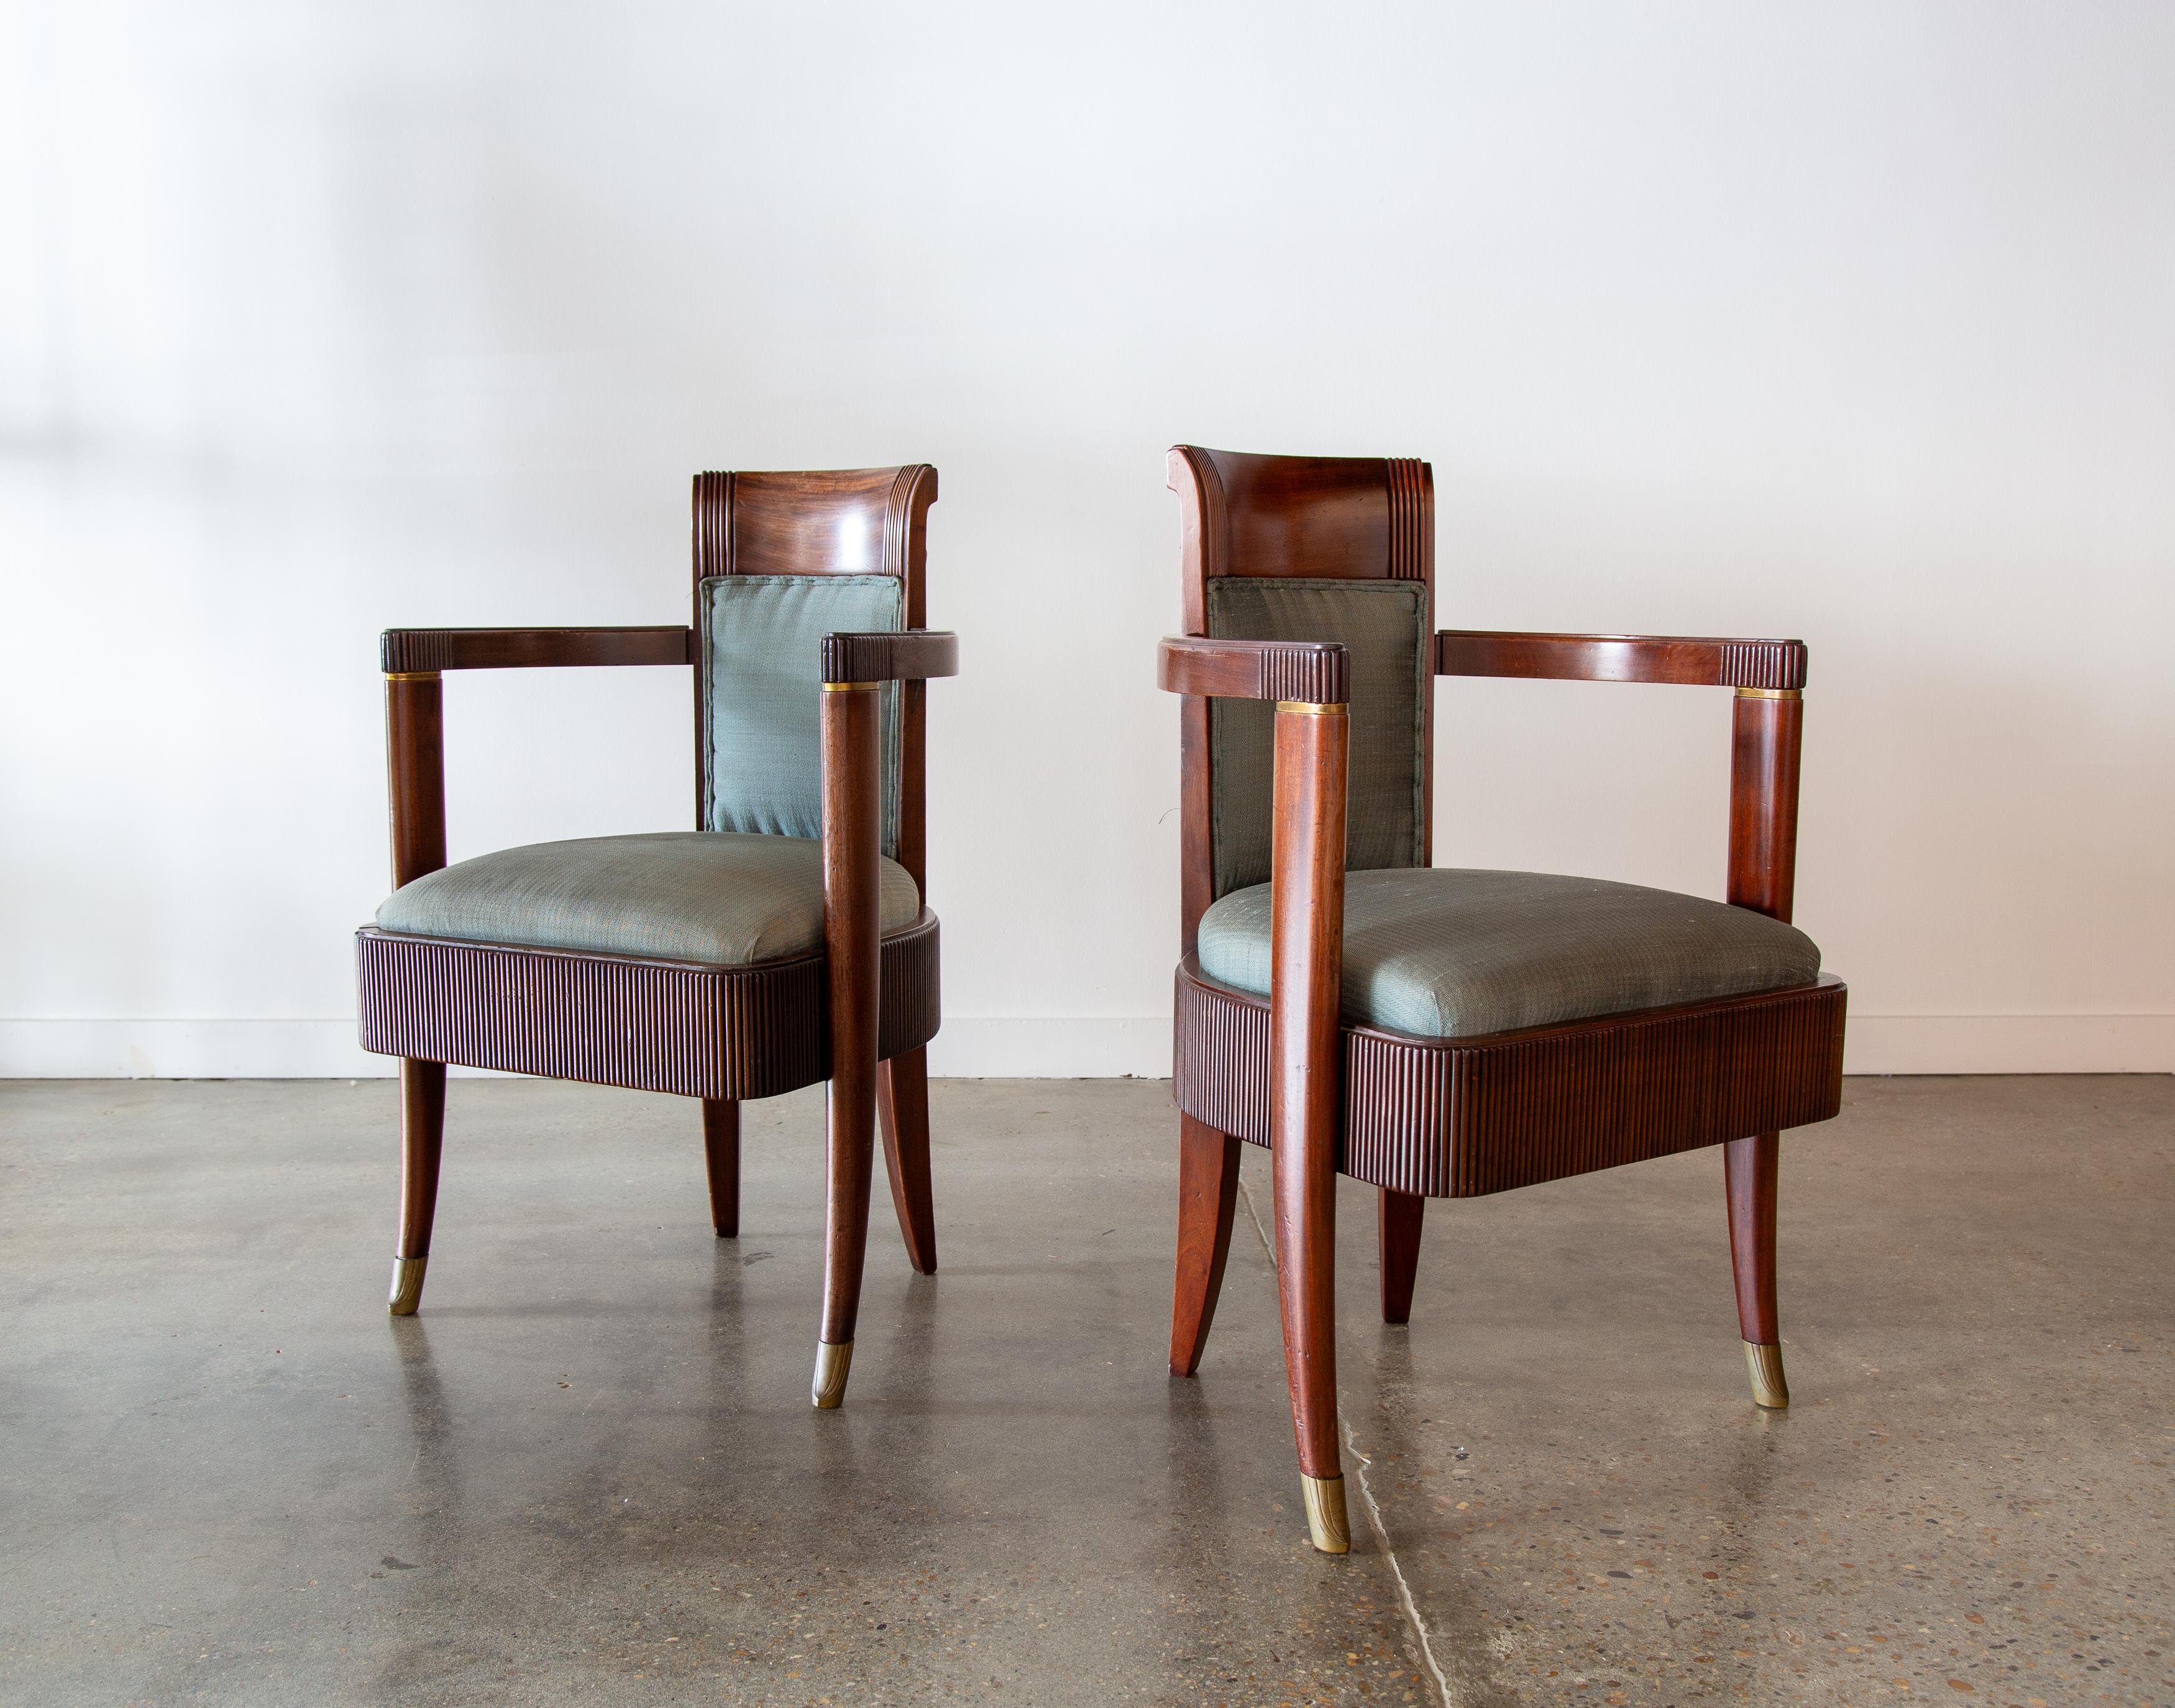 Armchairs from the first class dining room of the SS normandie circa 1934 designed by Pierre Patout. Solid Mahogany with beautiful fluted details around the base of the seat and repeated on the back and arms of the chair. Brass accents are found in